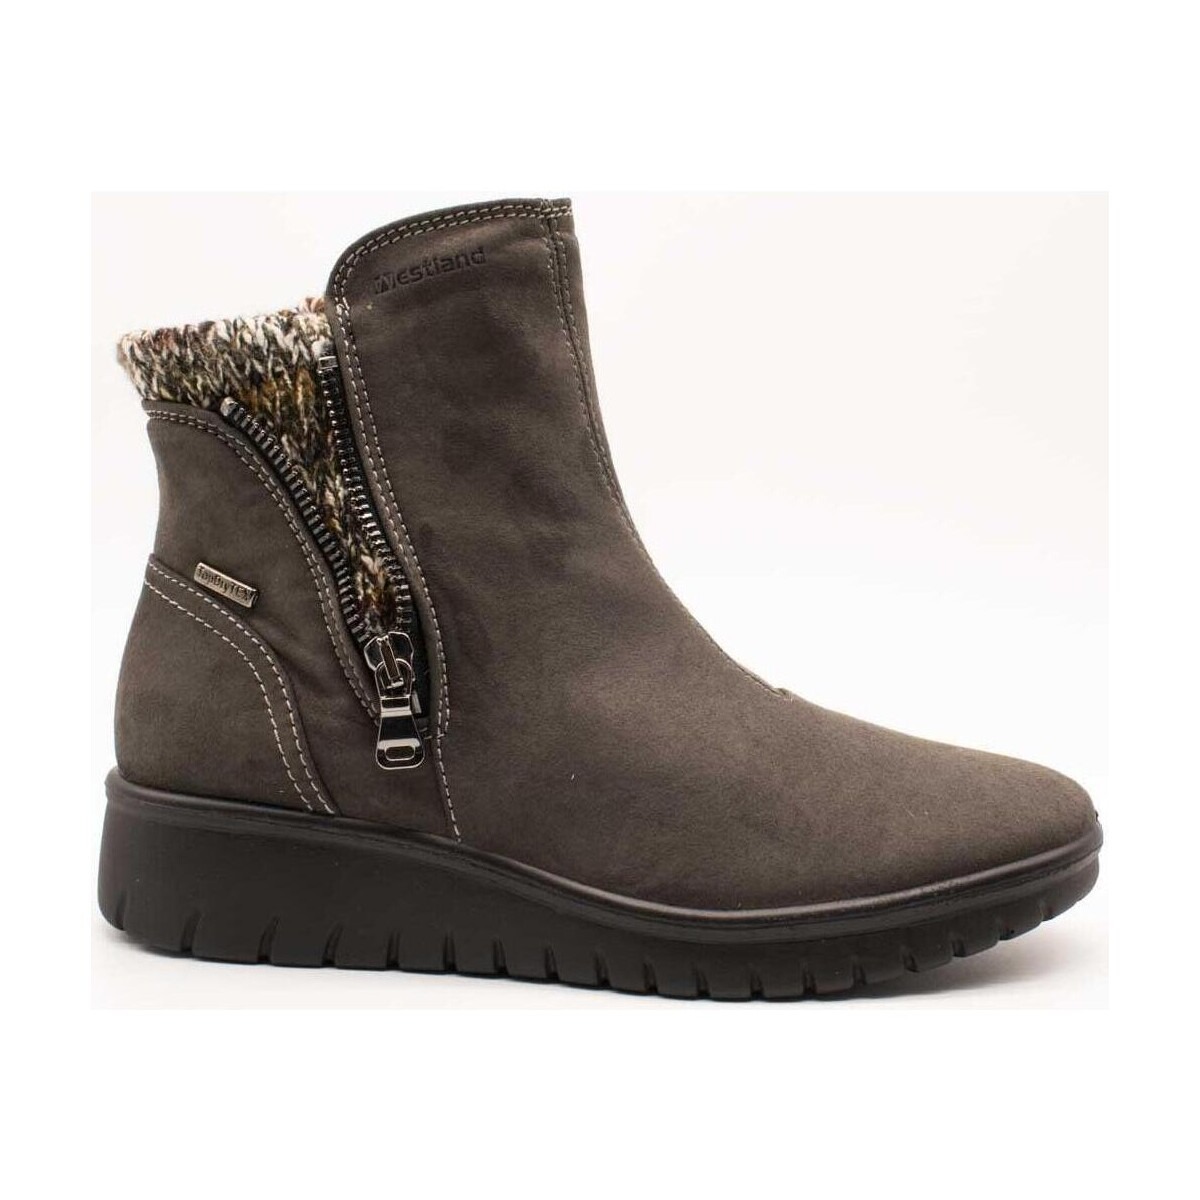 Westland Women's Ankle Boots Grey at Spartoo GOOFASH